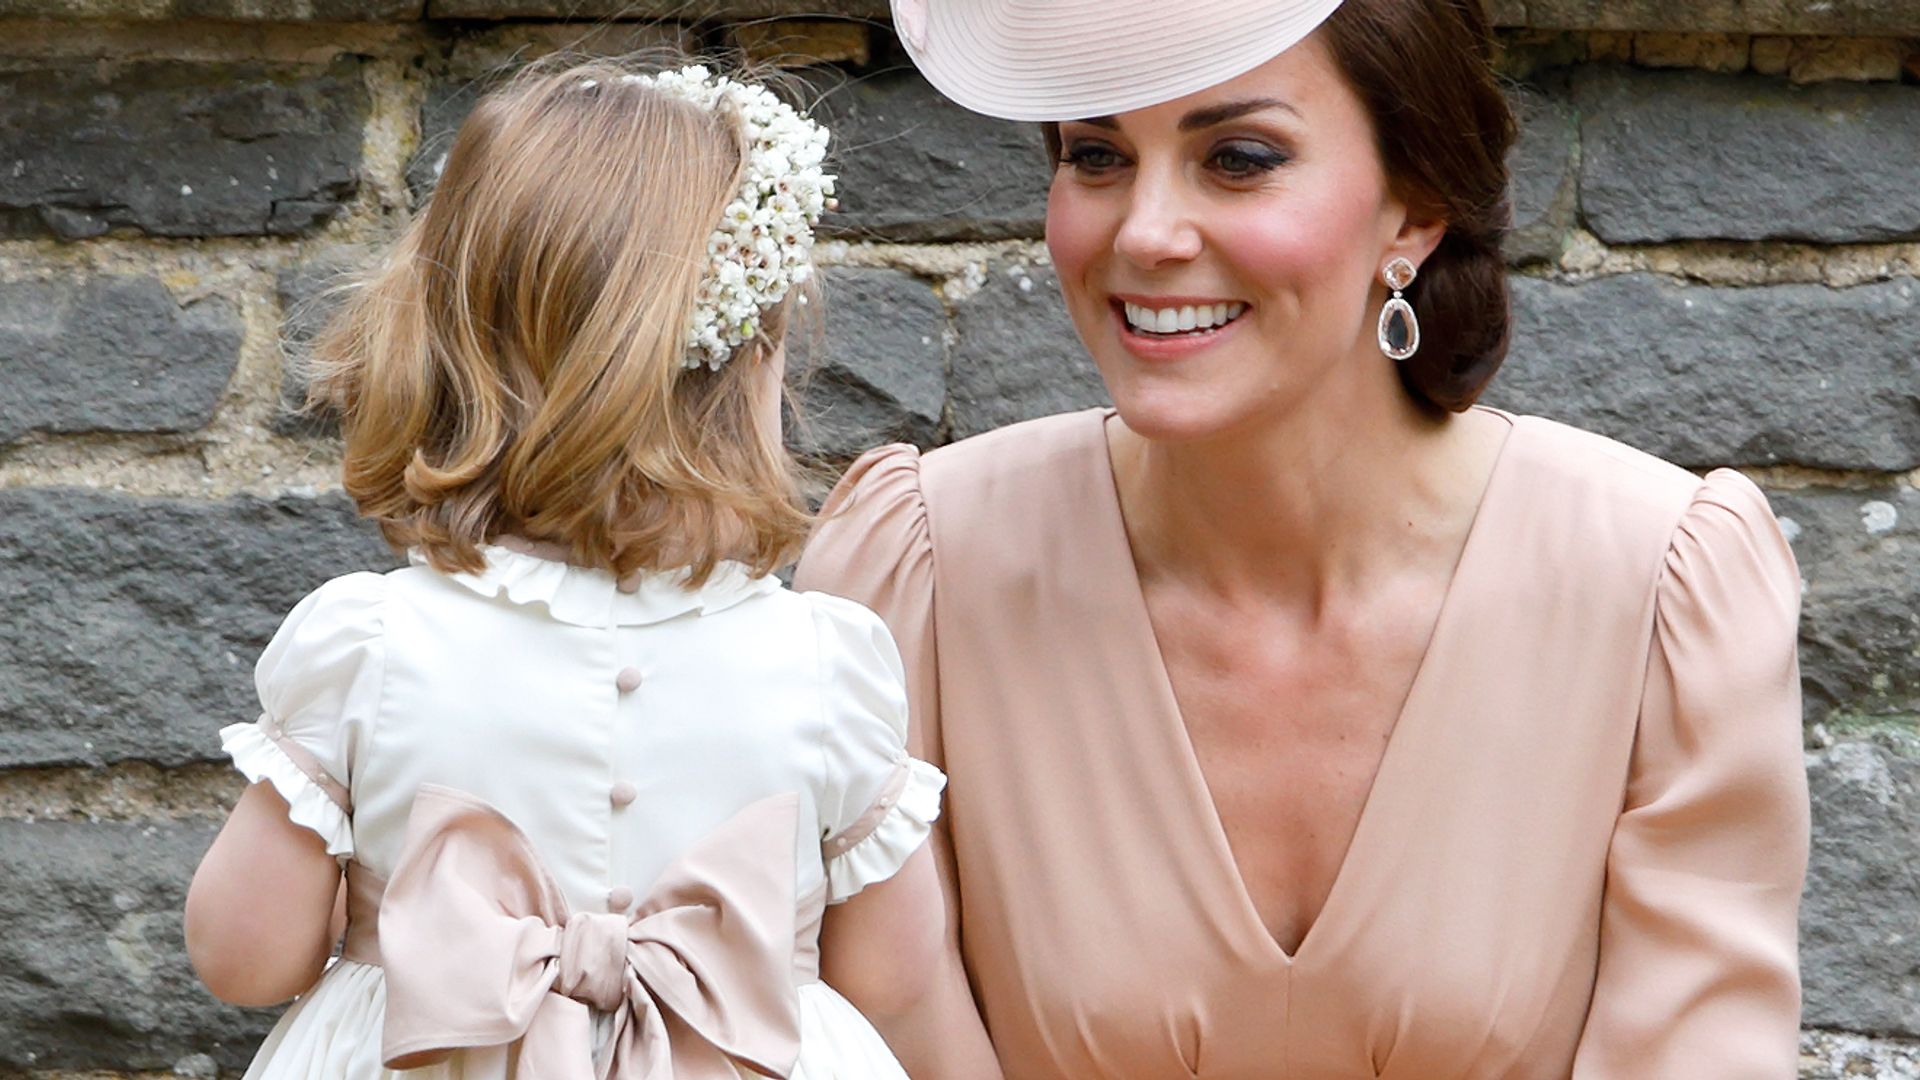 Princess Charlotte's epic bridesmaid dress made us want to buy this lookalike flower girl frock